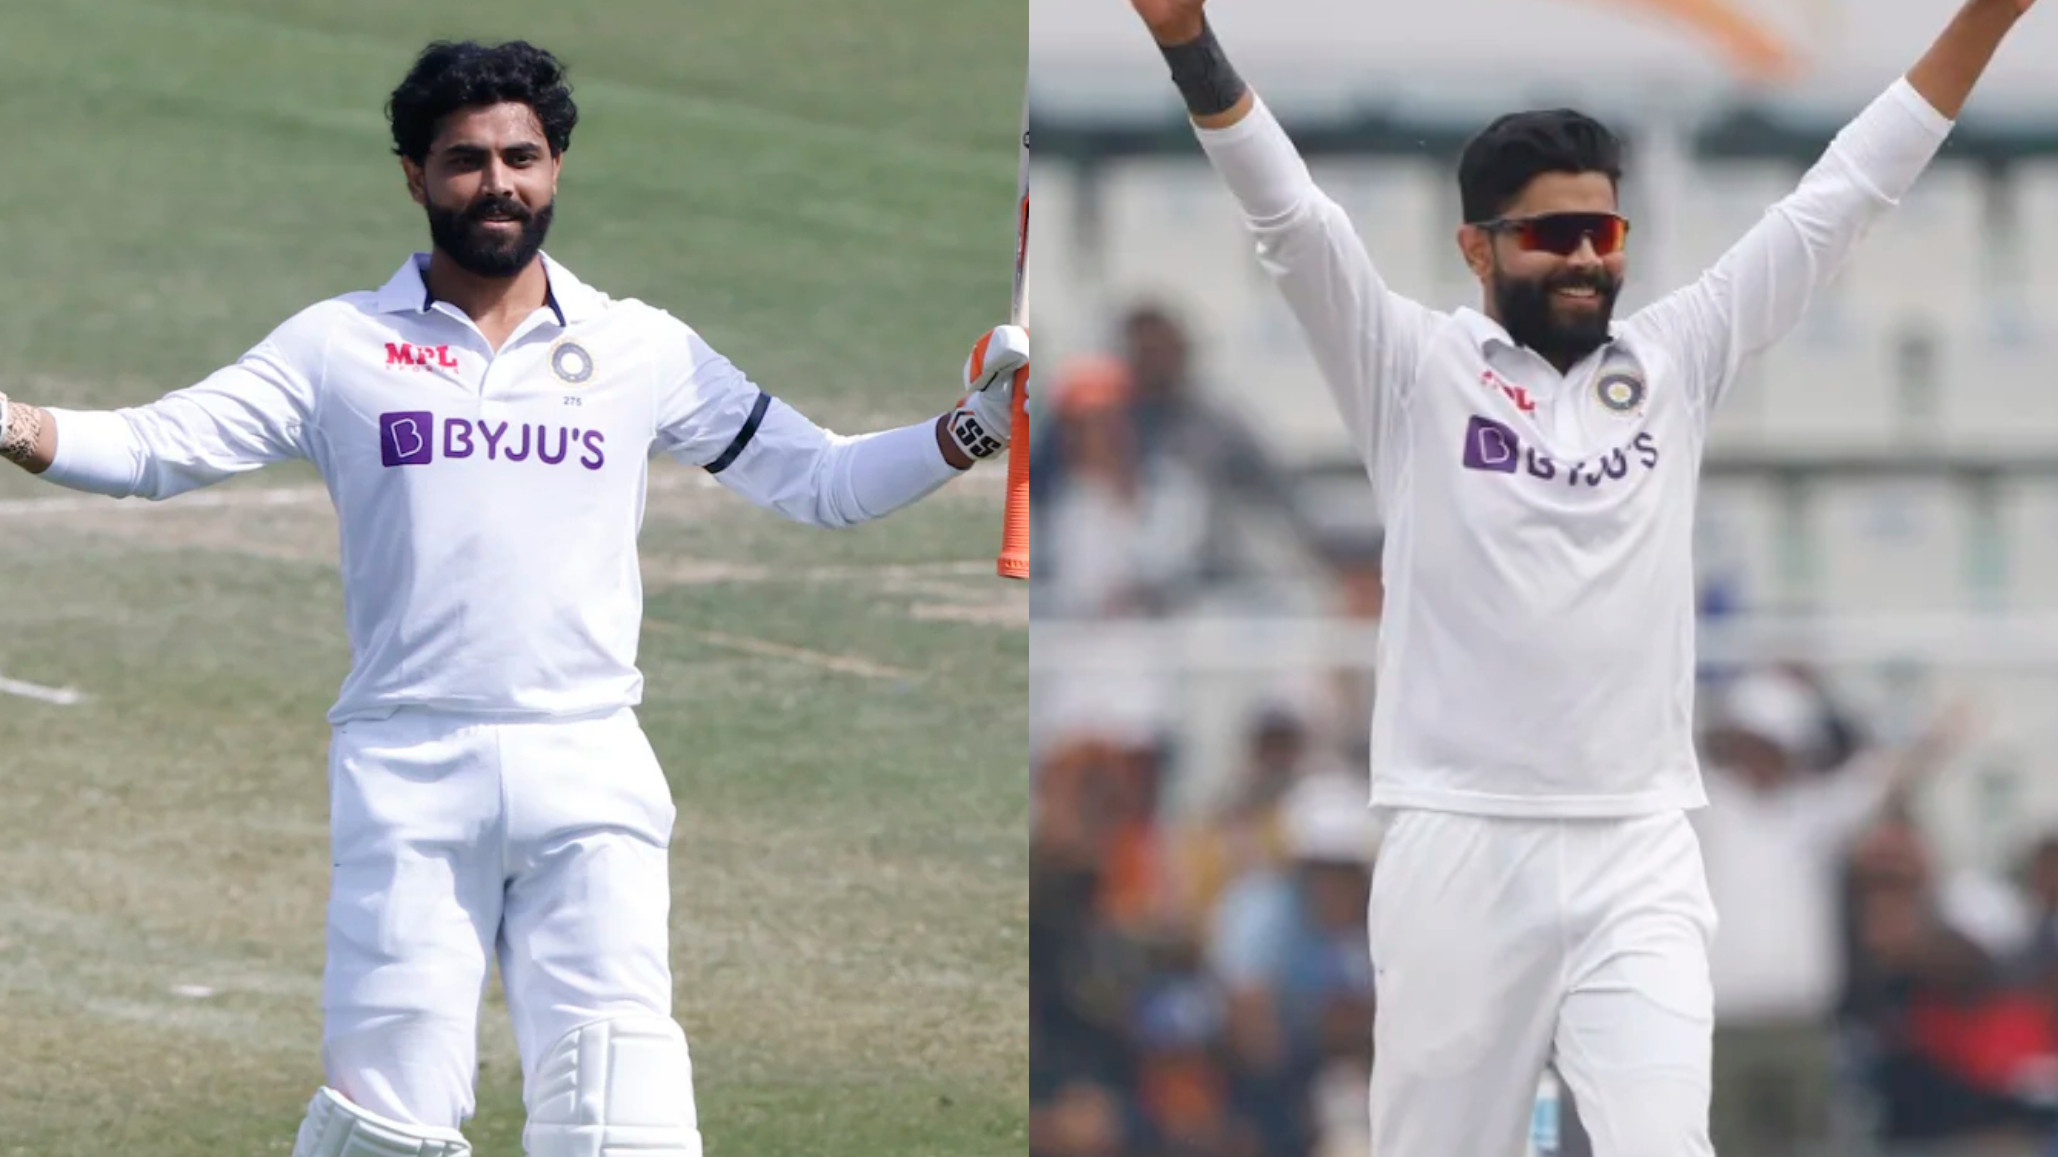 IND v SL 2022: Ravindra Jadeja achieves his most-wanted record, scores 100 and takes 5-fer in the same Test